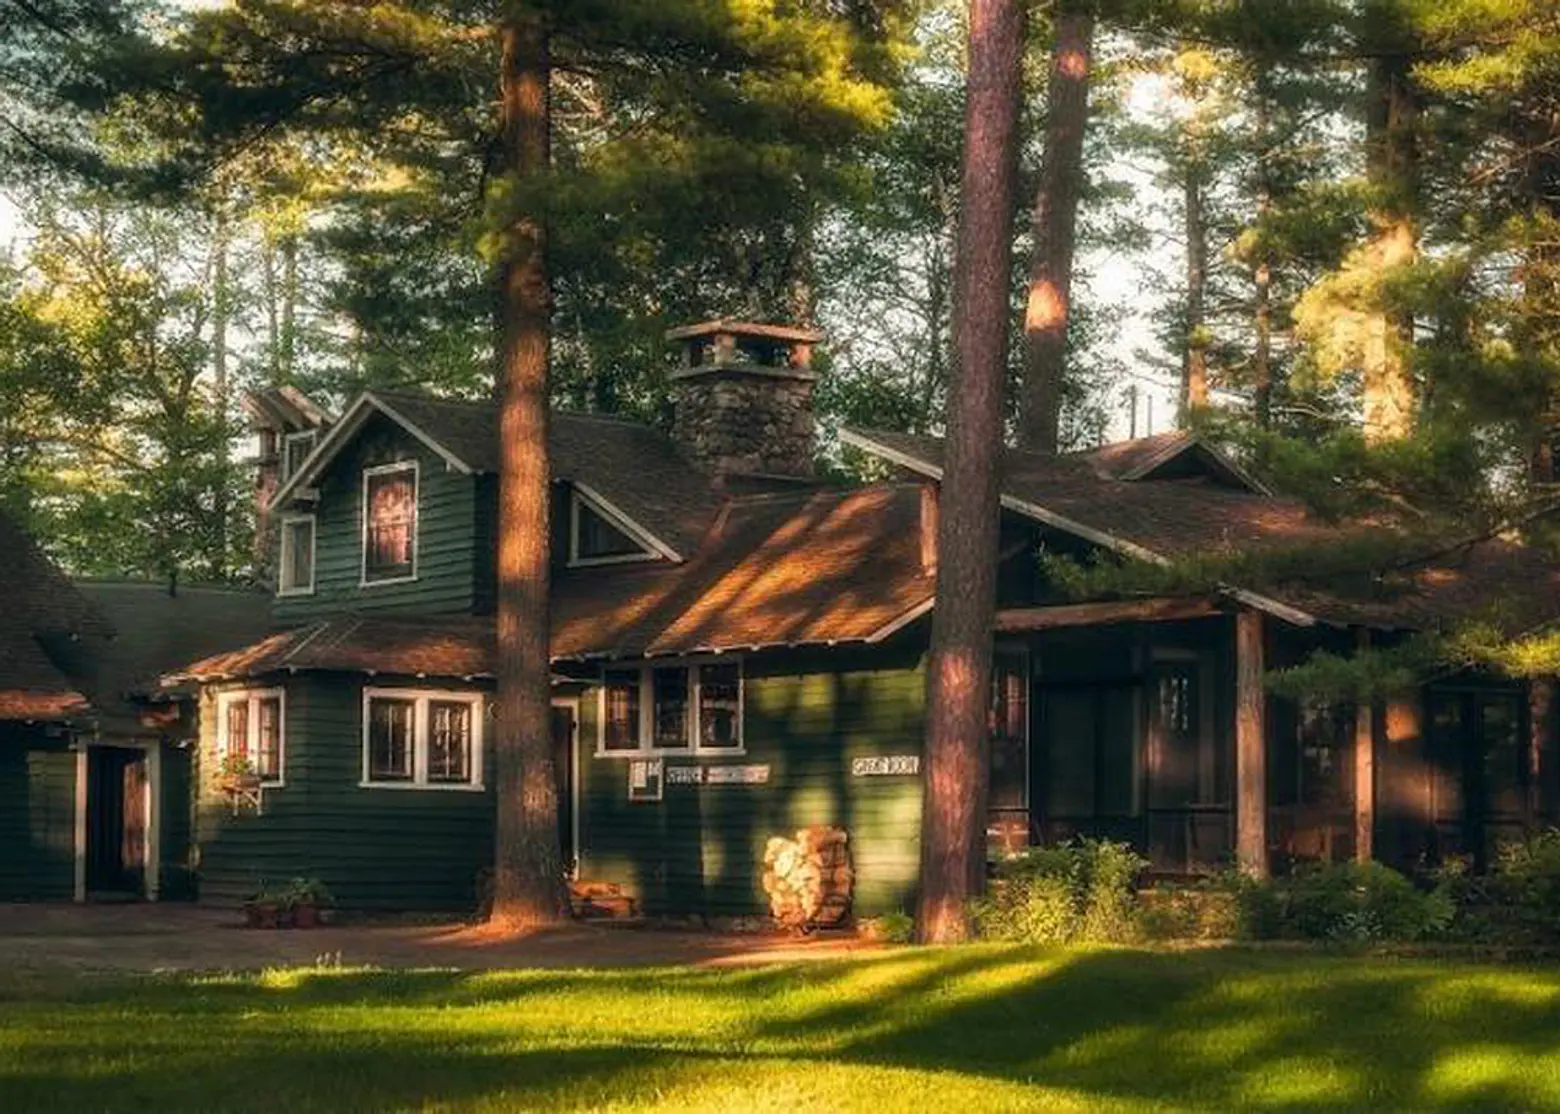 Stay at the Dreamy White Pine Camp President Calvin Coolidge Once Called His Secret Retreat